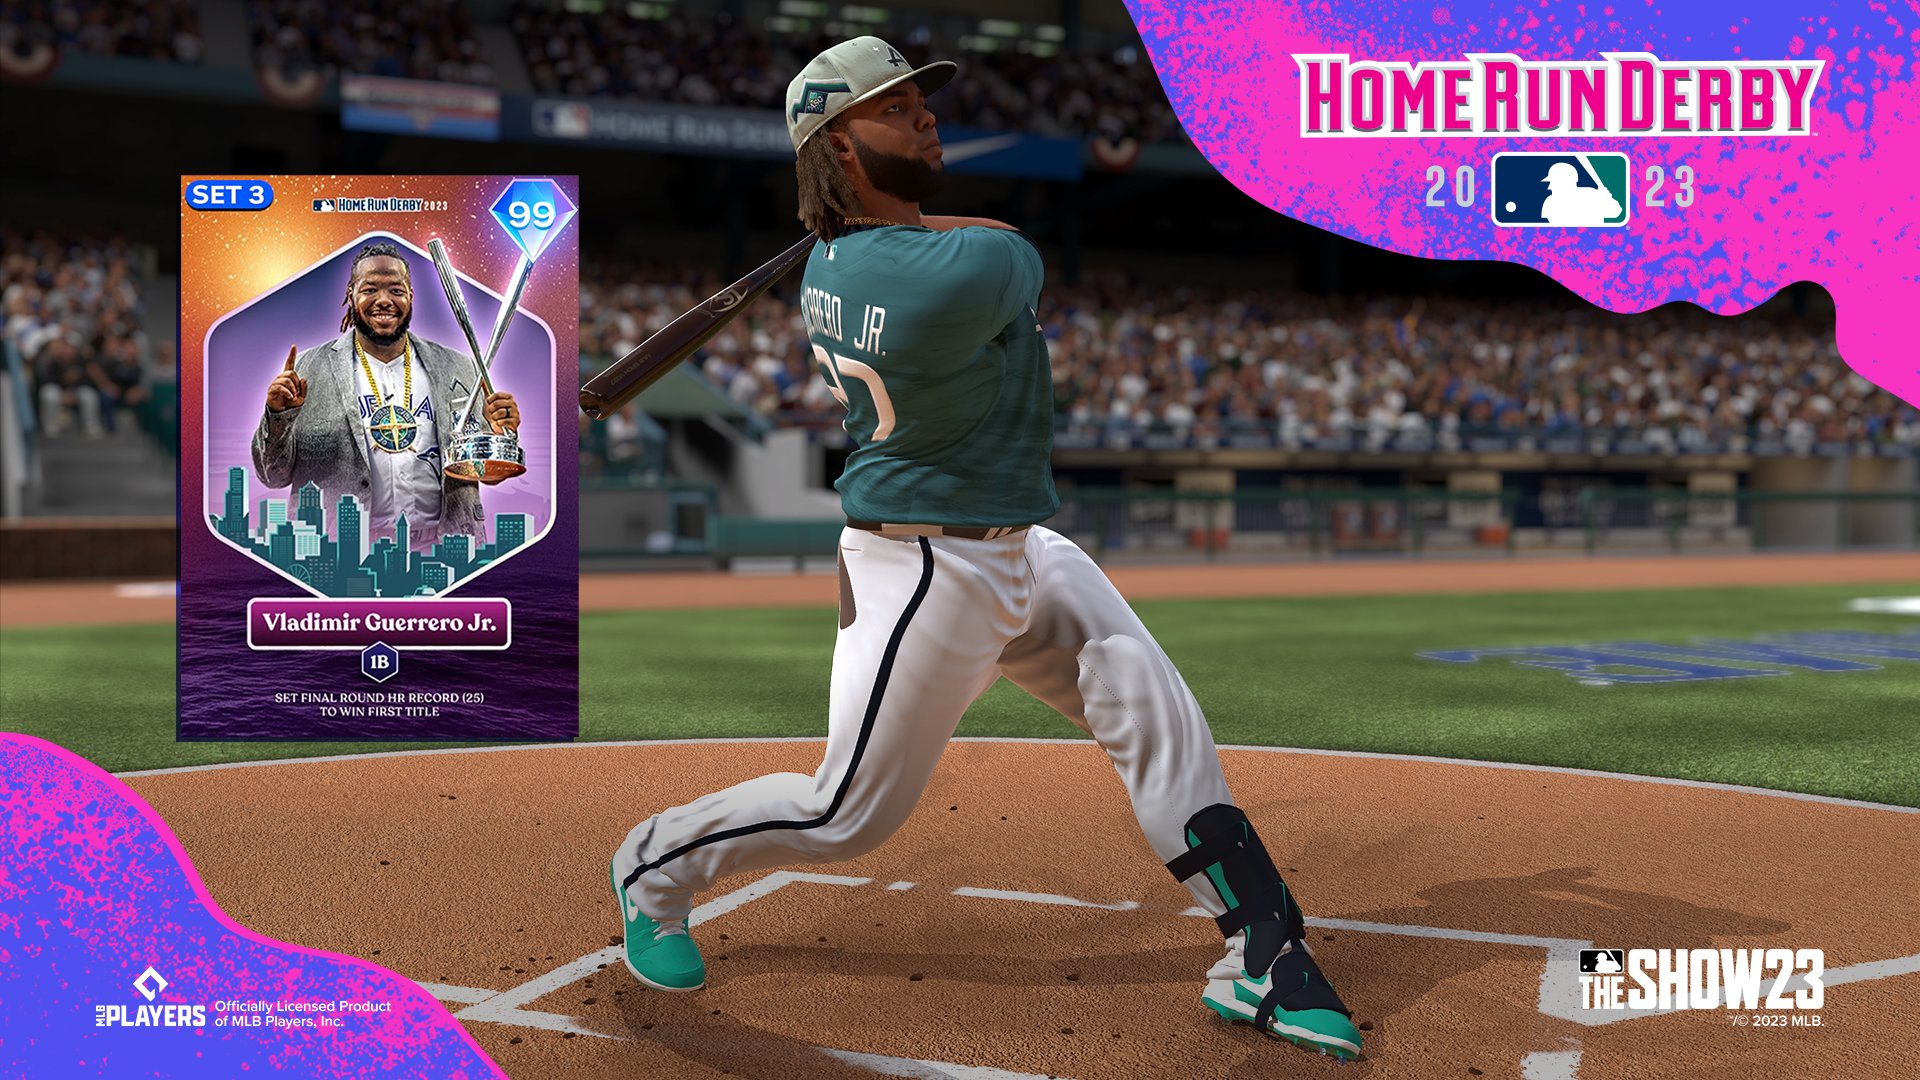 MLB The Show on X: The champion 💎 Vladimir Guerrero Jr. and